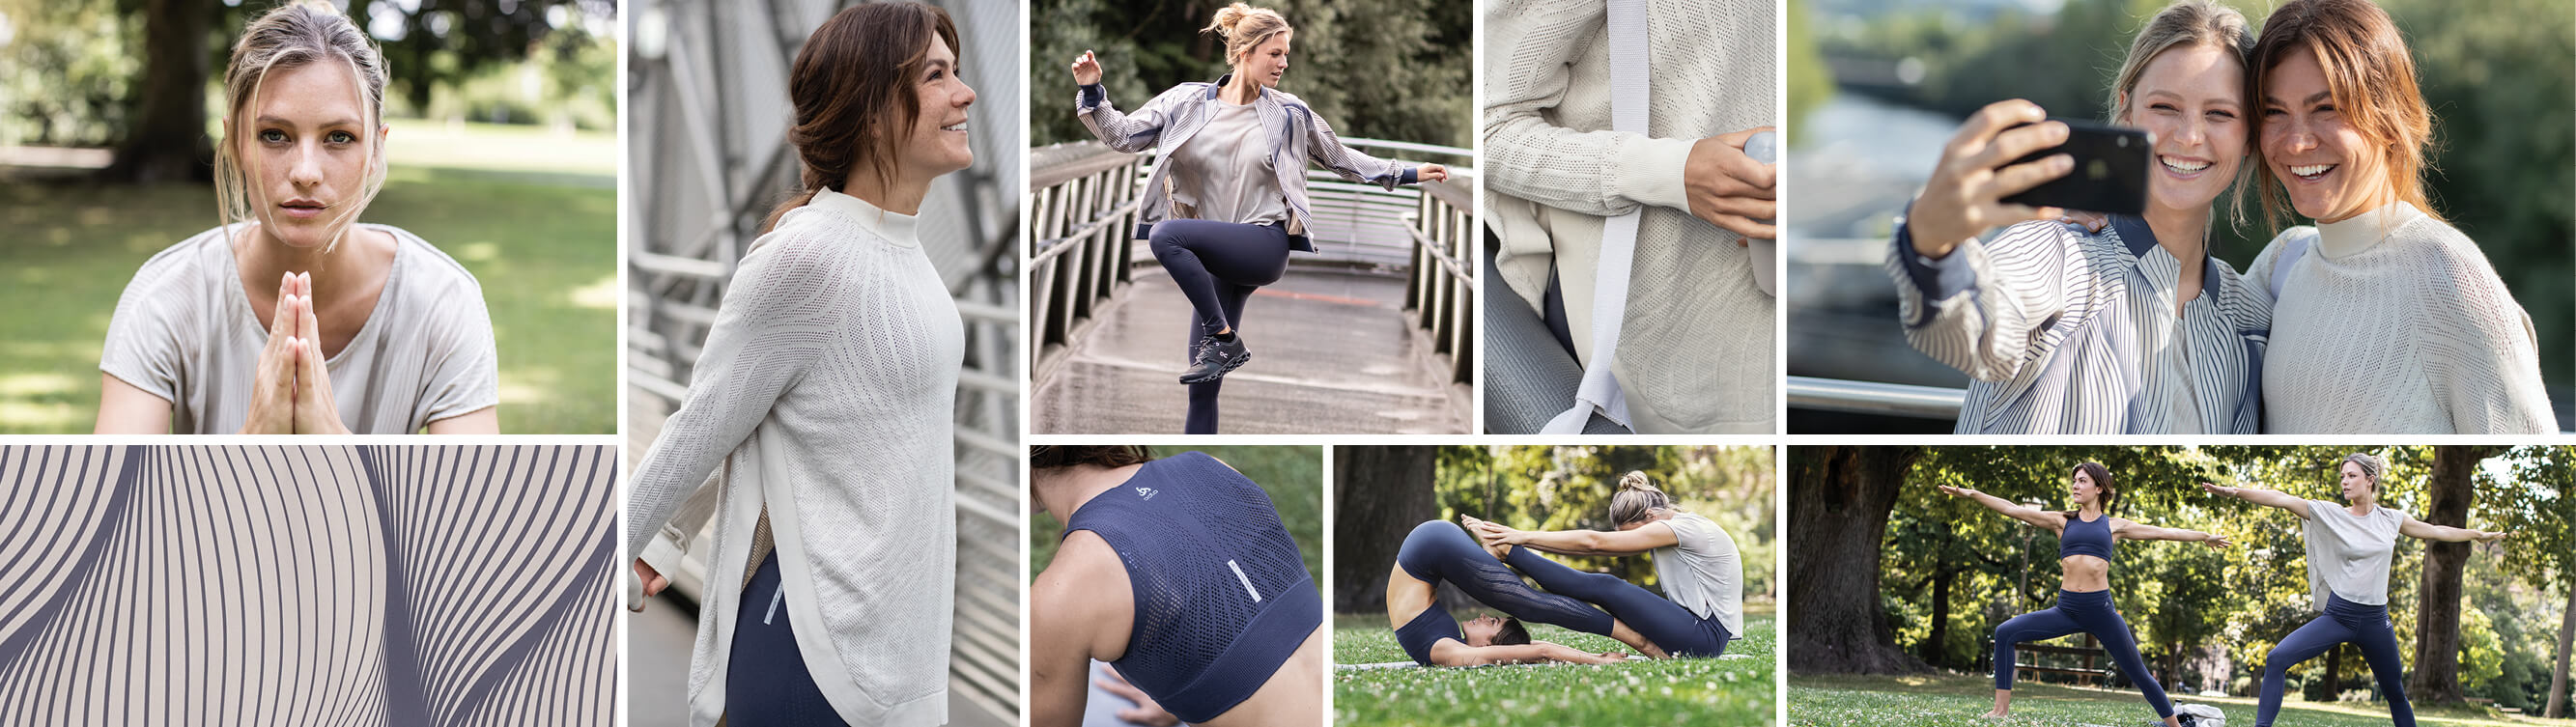 ODLO Women Activewear collection designed in collaboration with Zaha Hadid Design